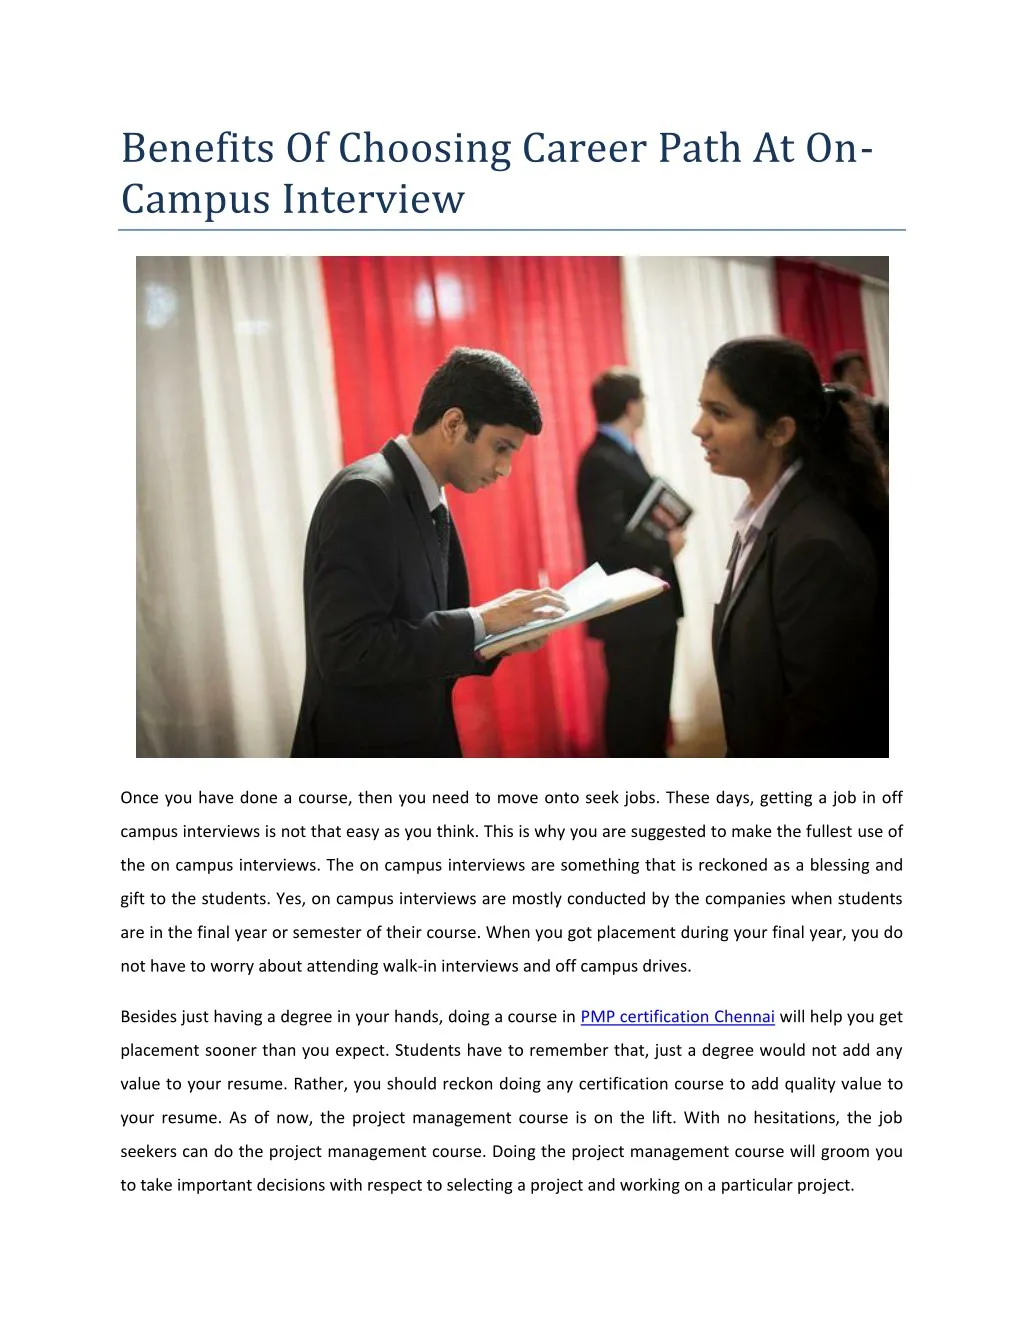 benefits of choosing career path at on campus